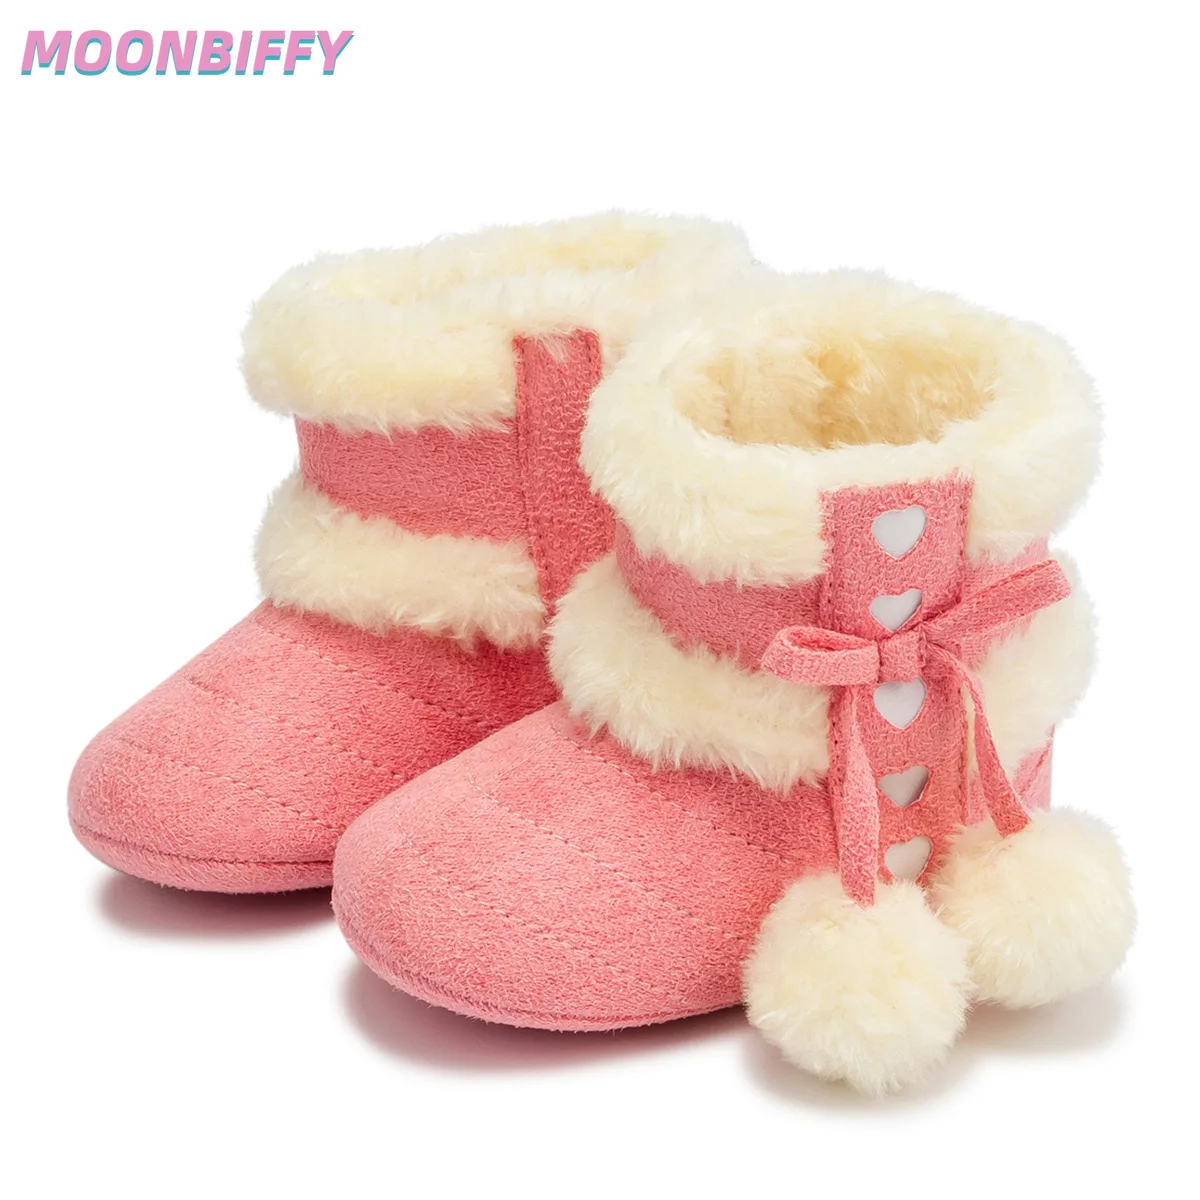 

Toddler Shoes Winter Snow Baby Boots Warm Fluff Balls Indoor Cottton Soft Rubber Sole Infant Newborn Toddler Baby Shoes Walkers